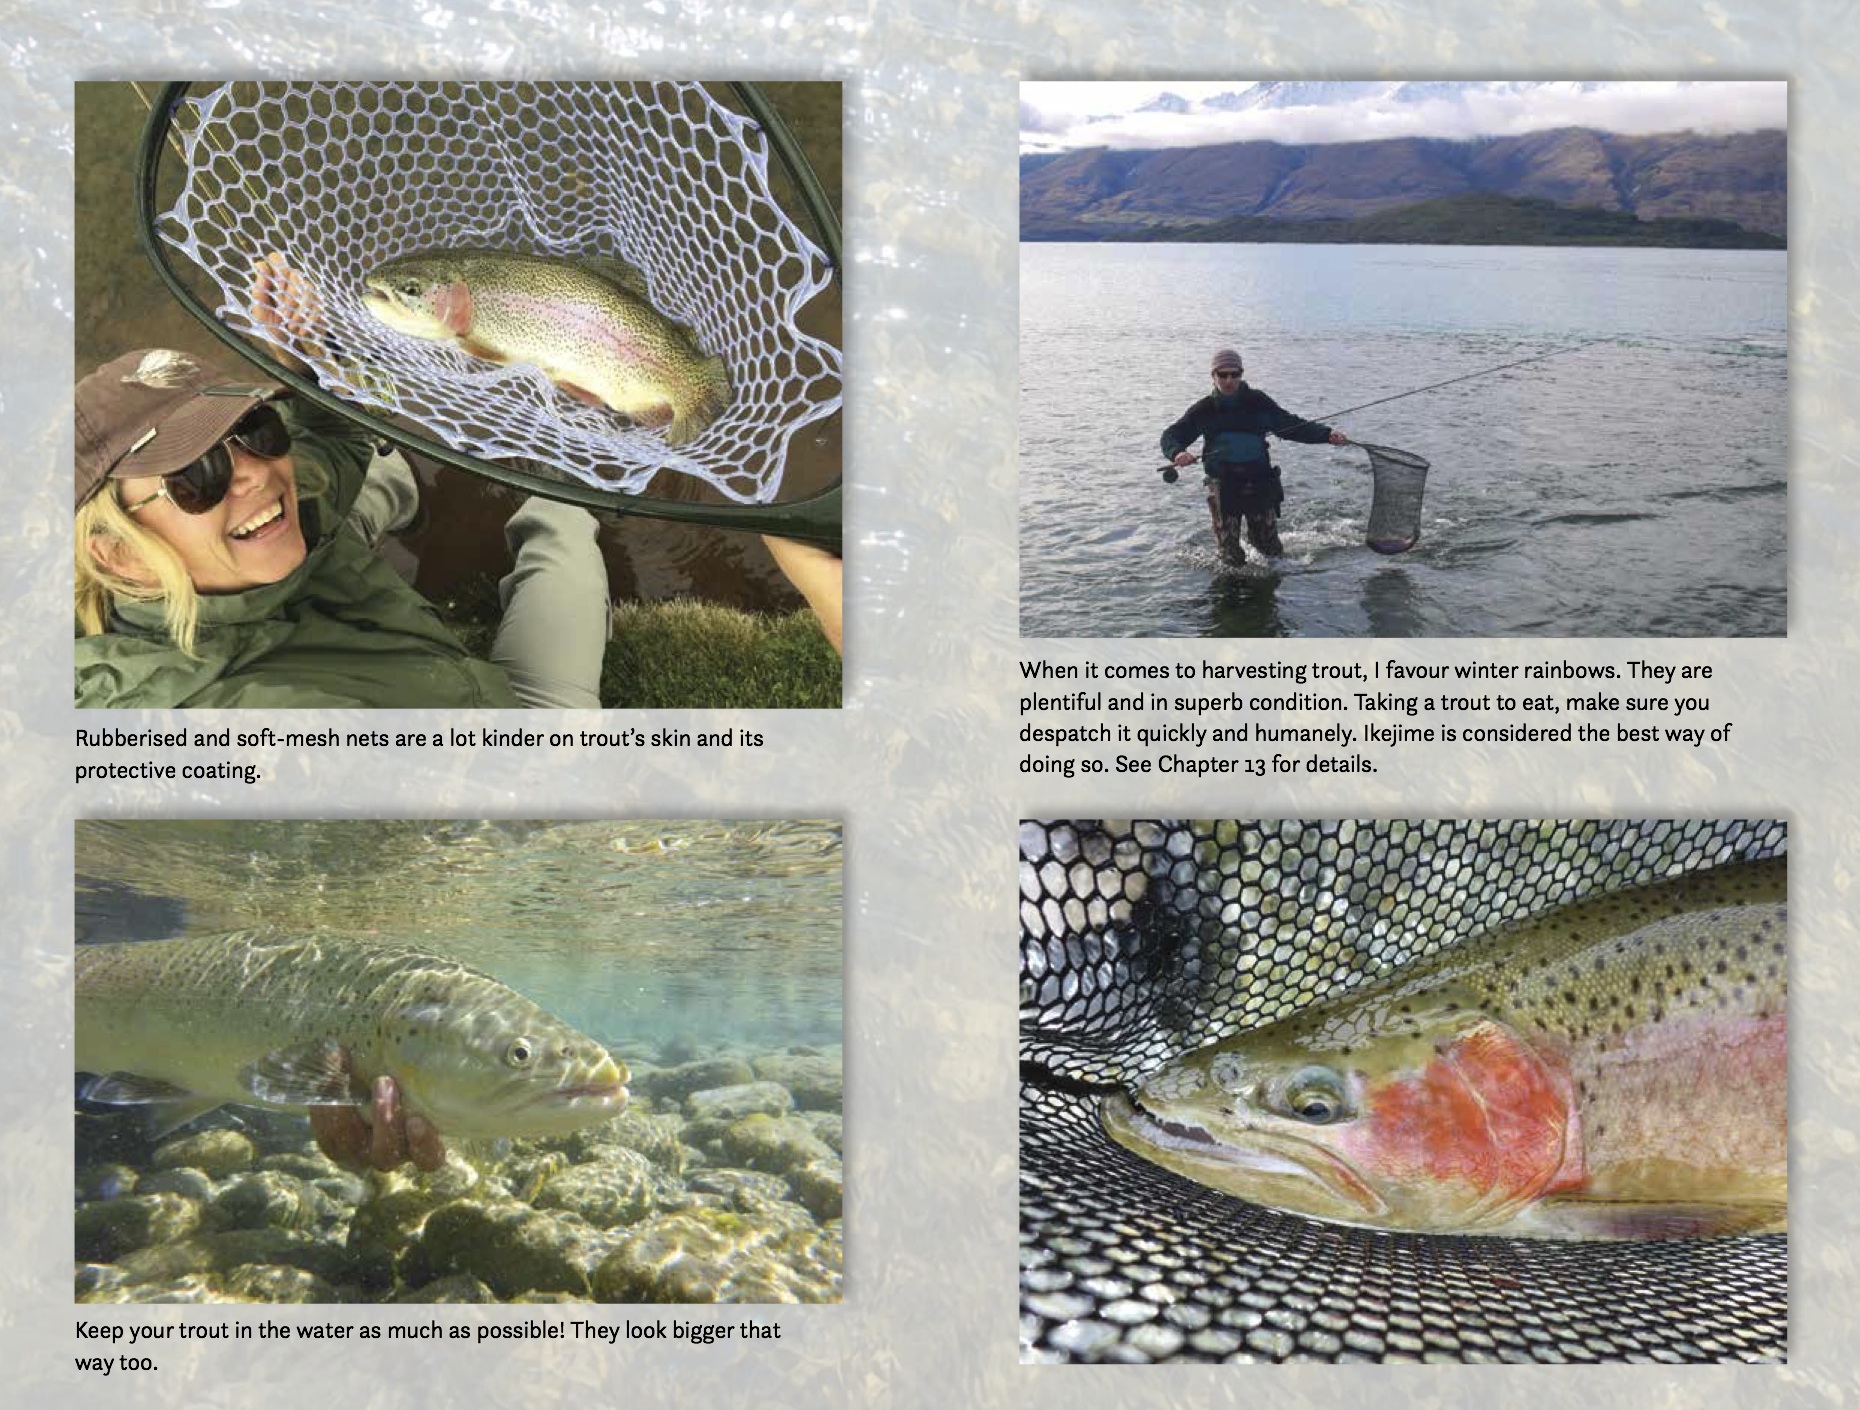 Fly fishing in Wanaka, Queenstown, Turangi, New Zealand, with